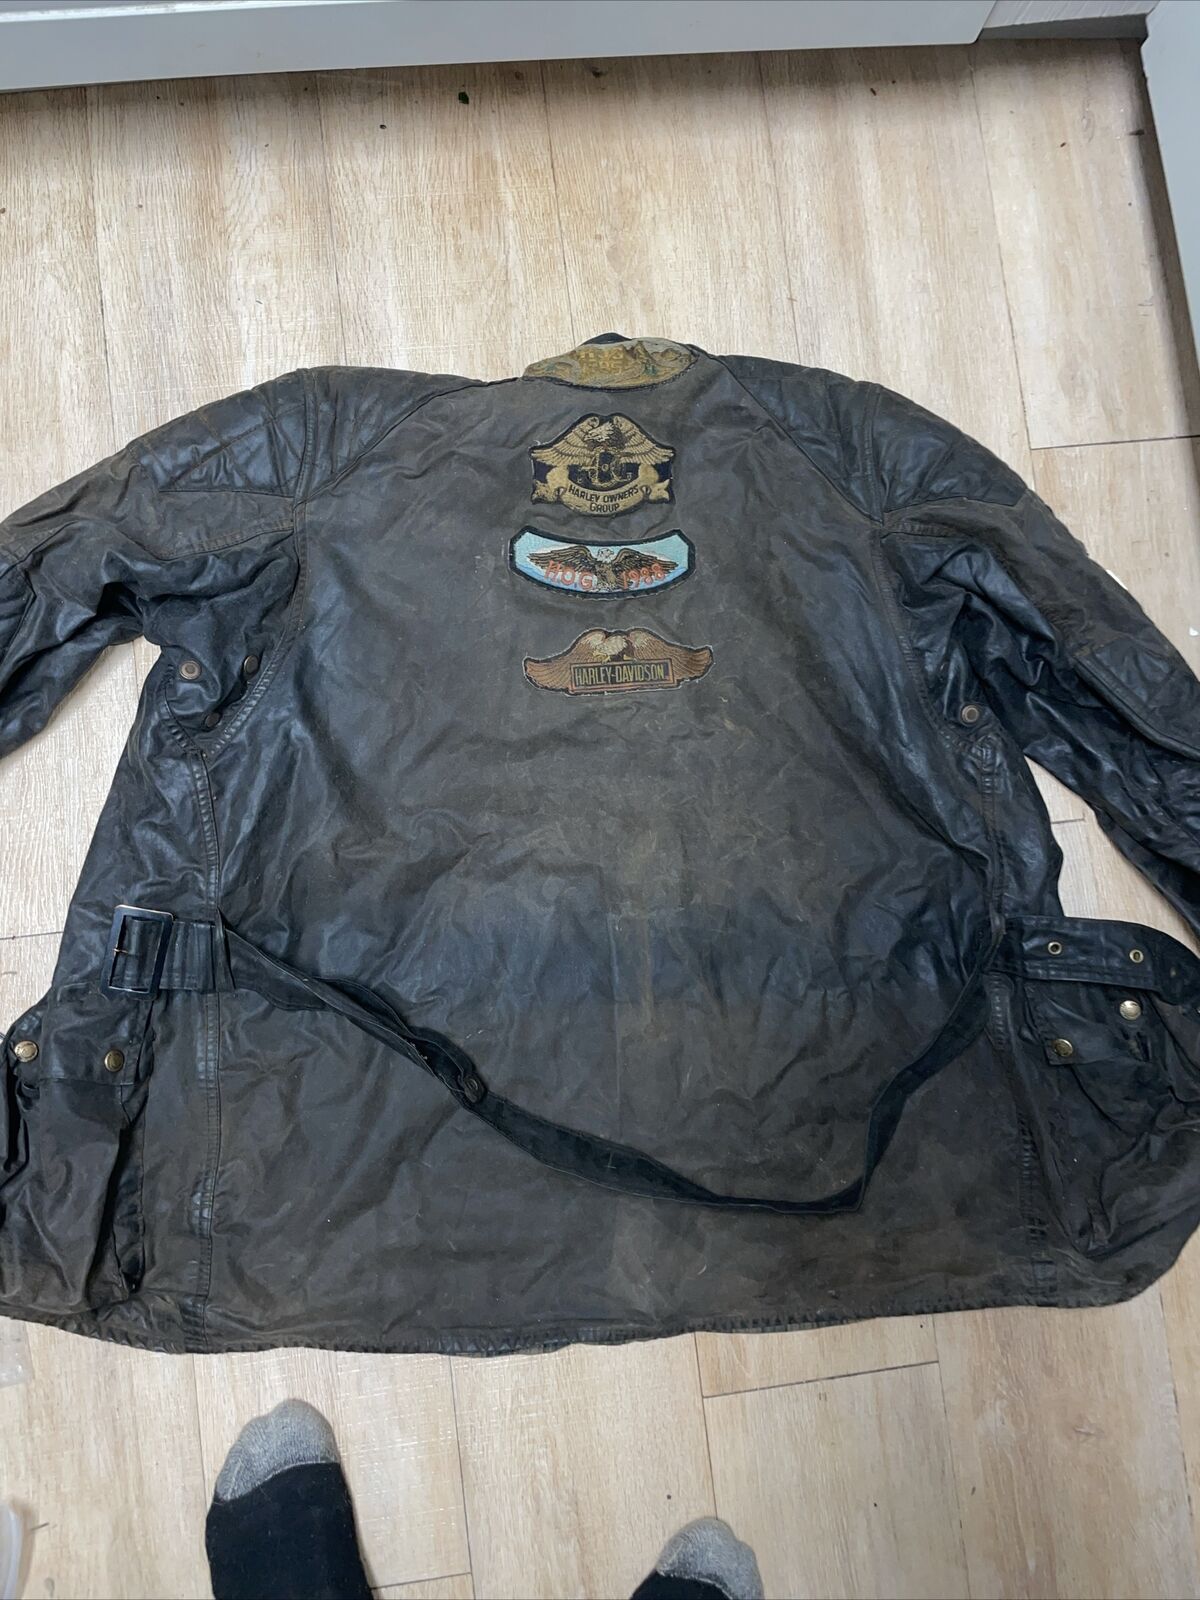 Belstaff UK Coolest Harley Davidson Jacket Ever Tons Of Pins And Patches Patina